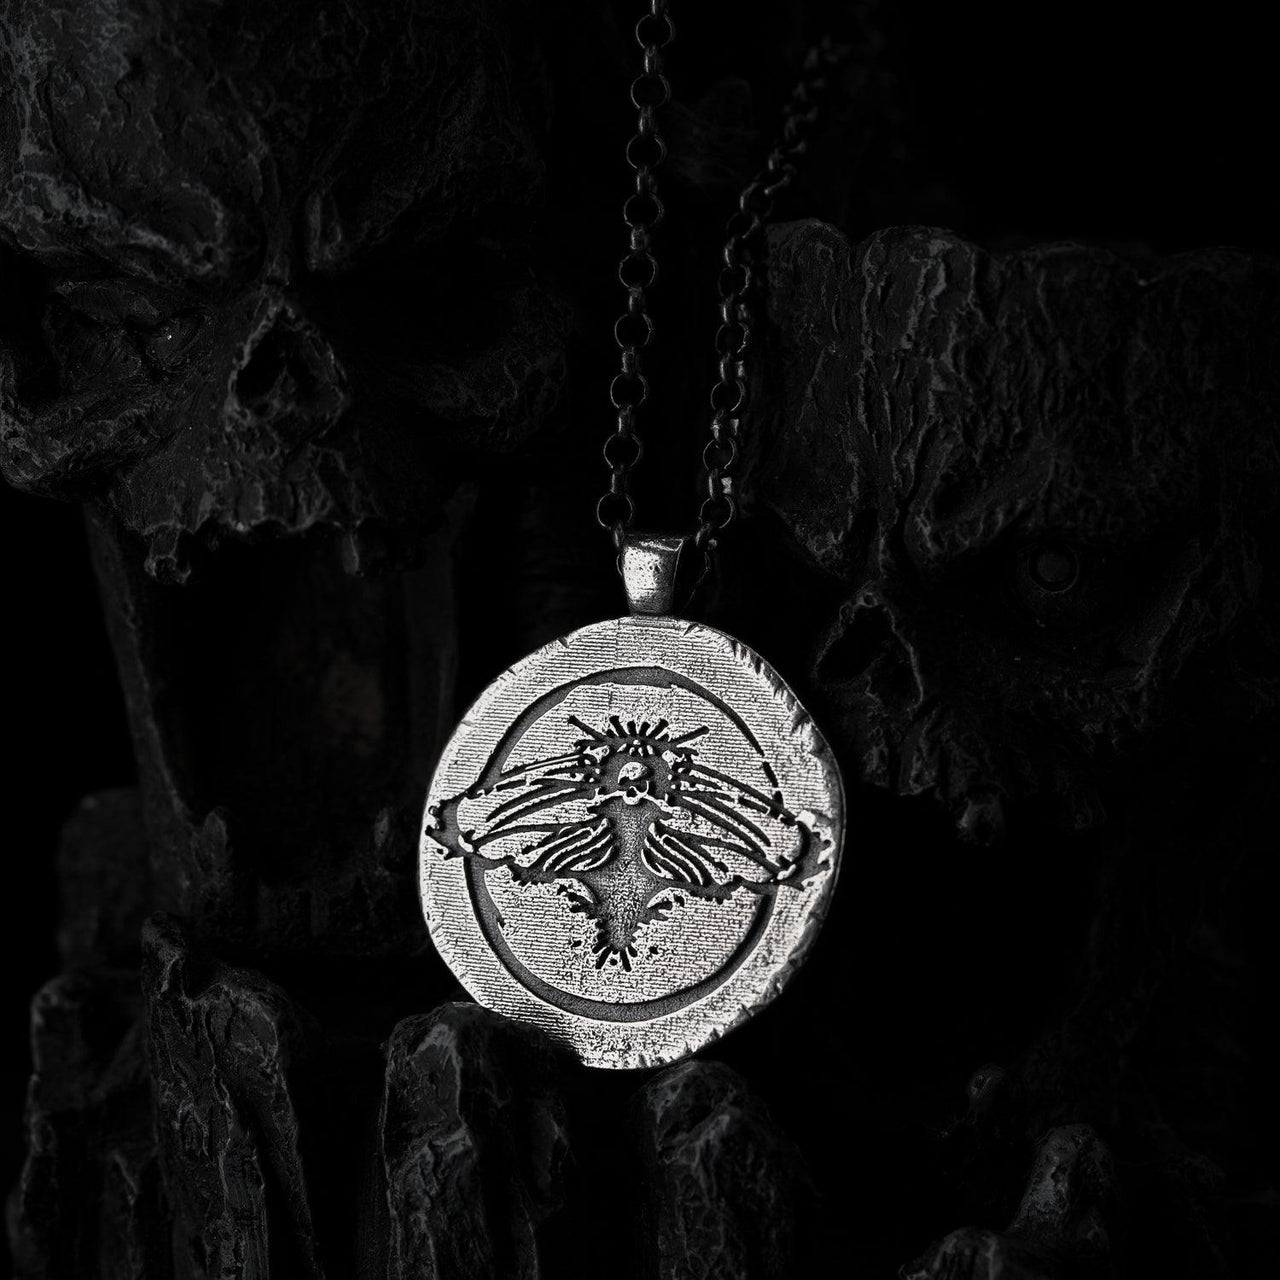 Death's-Head Hawkmoth on a circular pendant by Black Feather Design